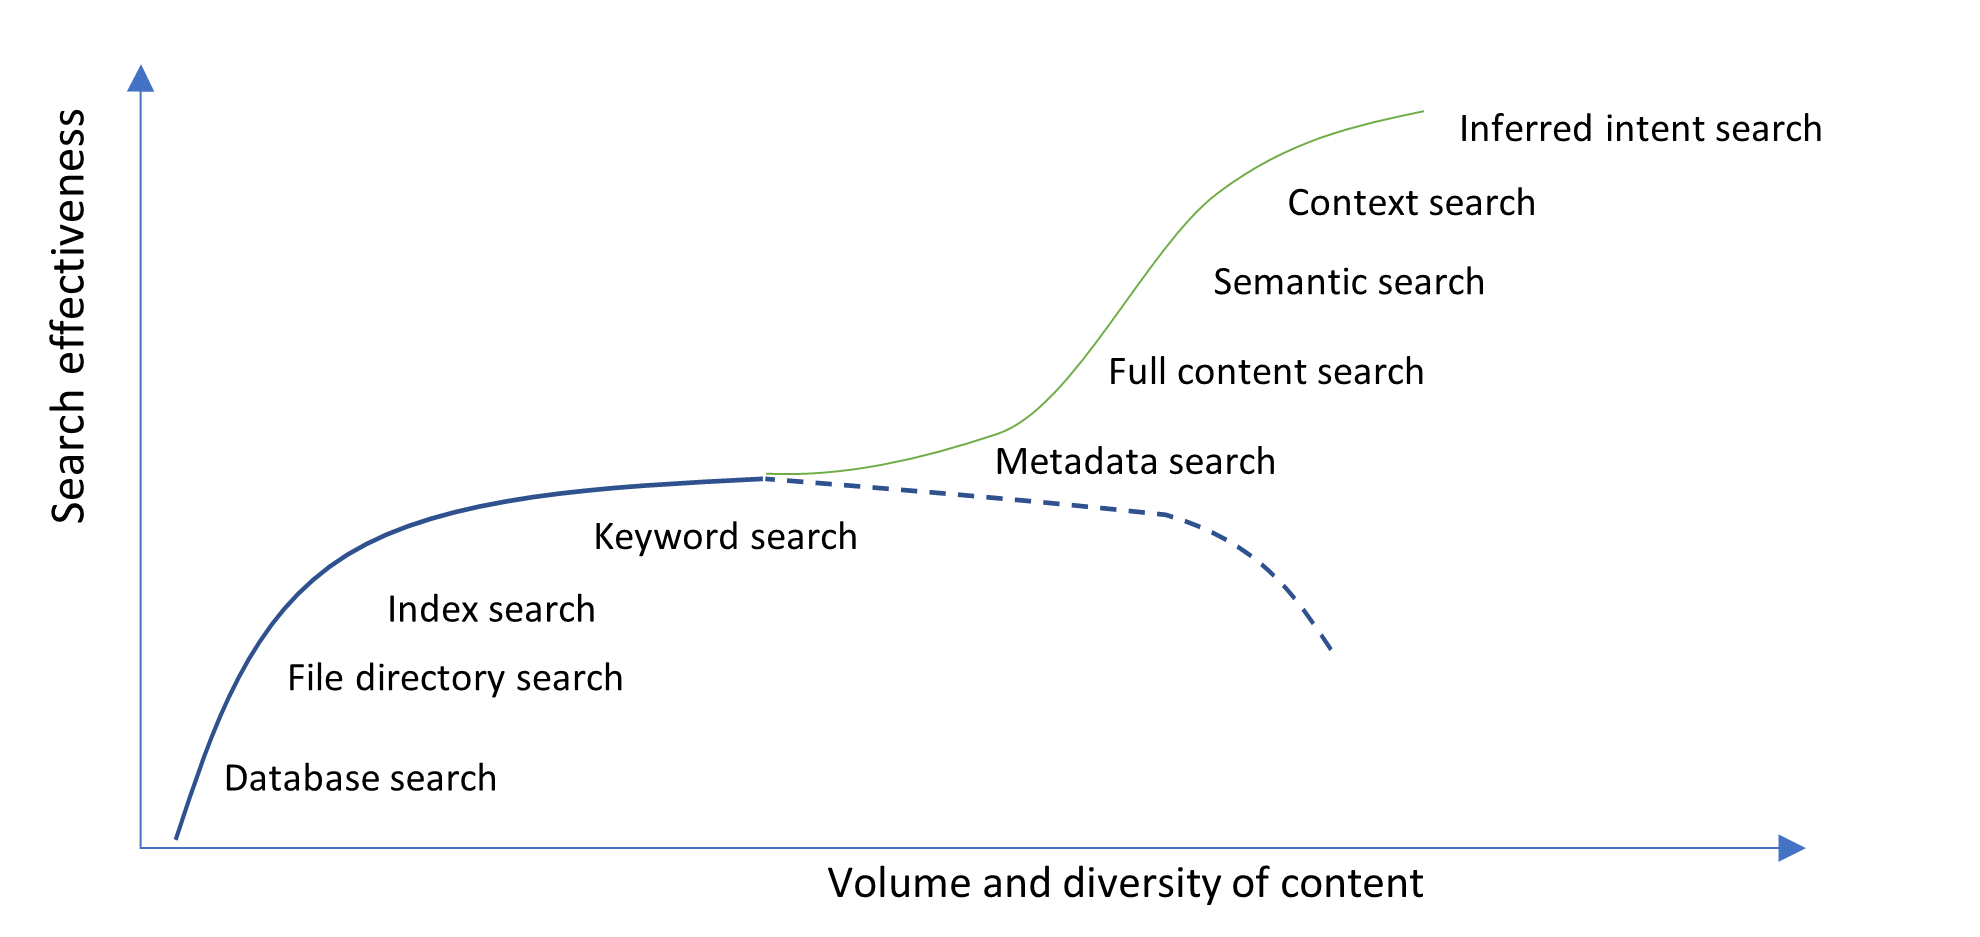 Volume and diversity of content